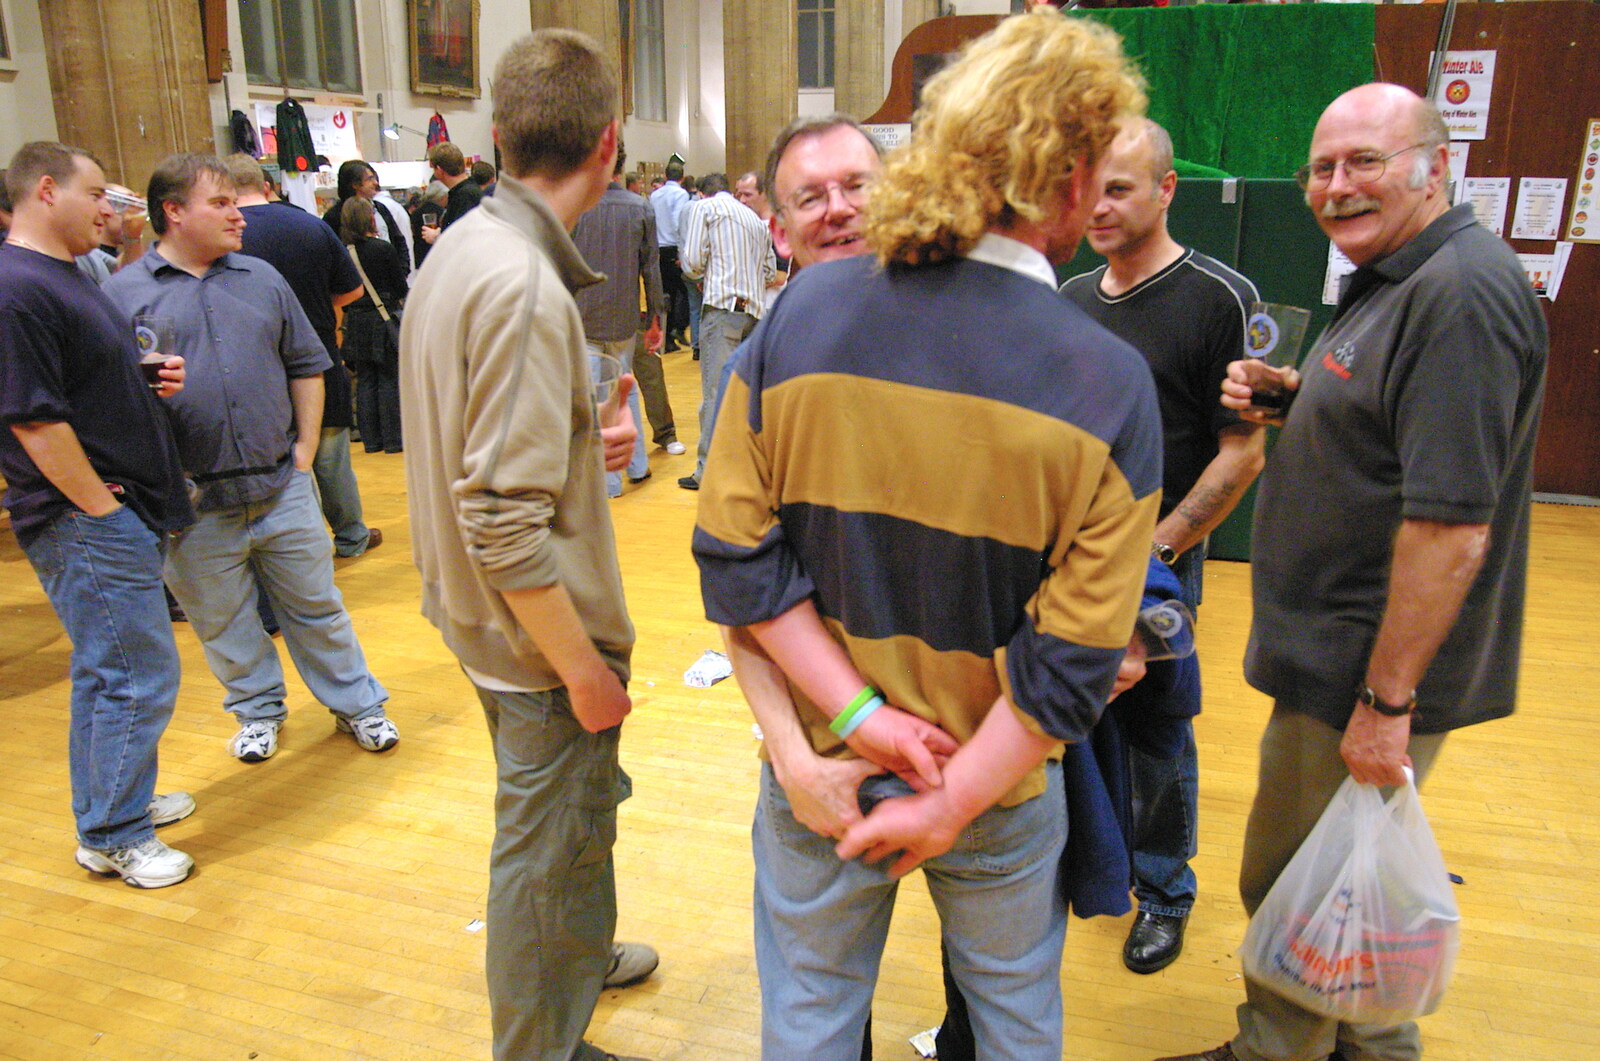 Ping-pong Peter grapples with Wavy's arse from The 28th Norwich Beer Festival, St. Andrew's Hall, Norwich - 26th October 2005